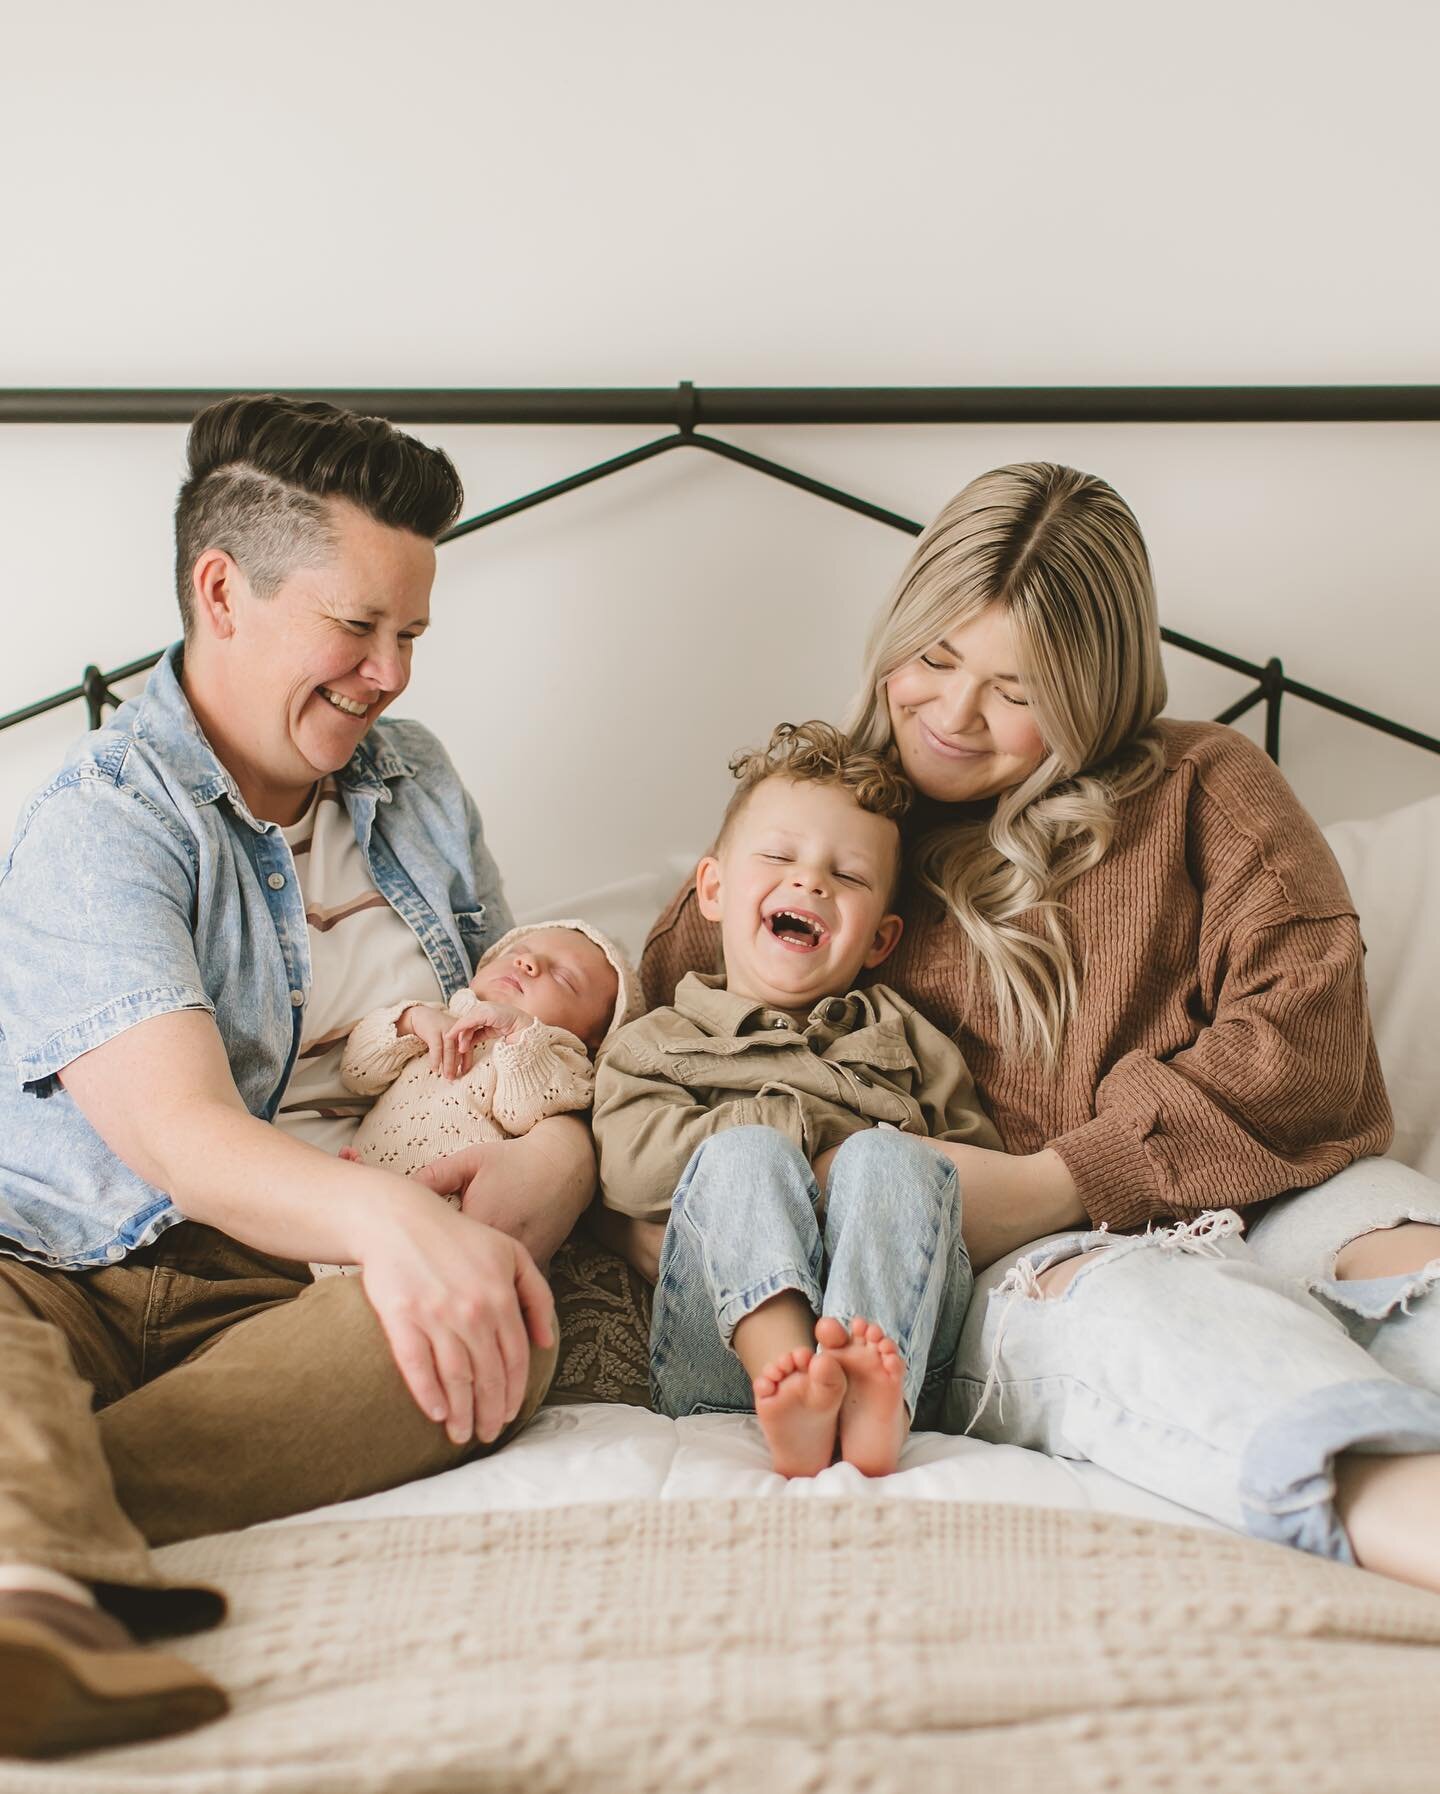 Newborn session with a toddler? Check out my latest reel from this session for my top tip for getting toddlers to cooperate! I adore this little family so much. And for the record, this toddler made my job SO easy. #utahnewbornphotographer #utahfamil